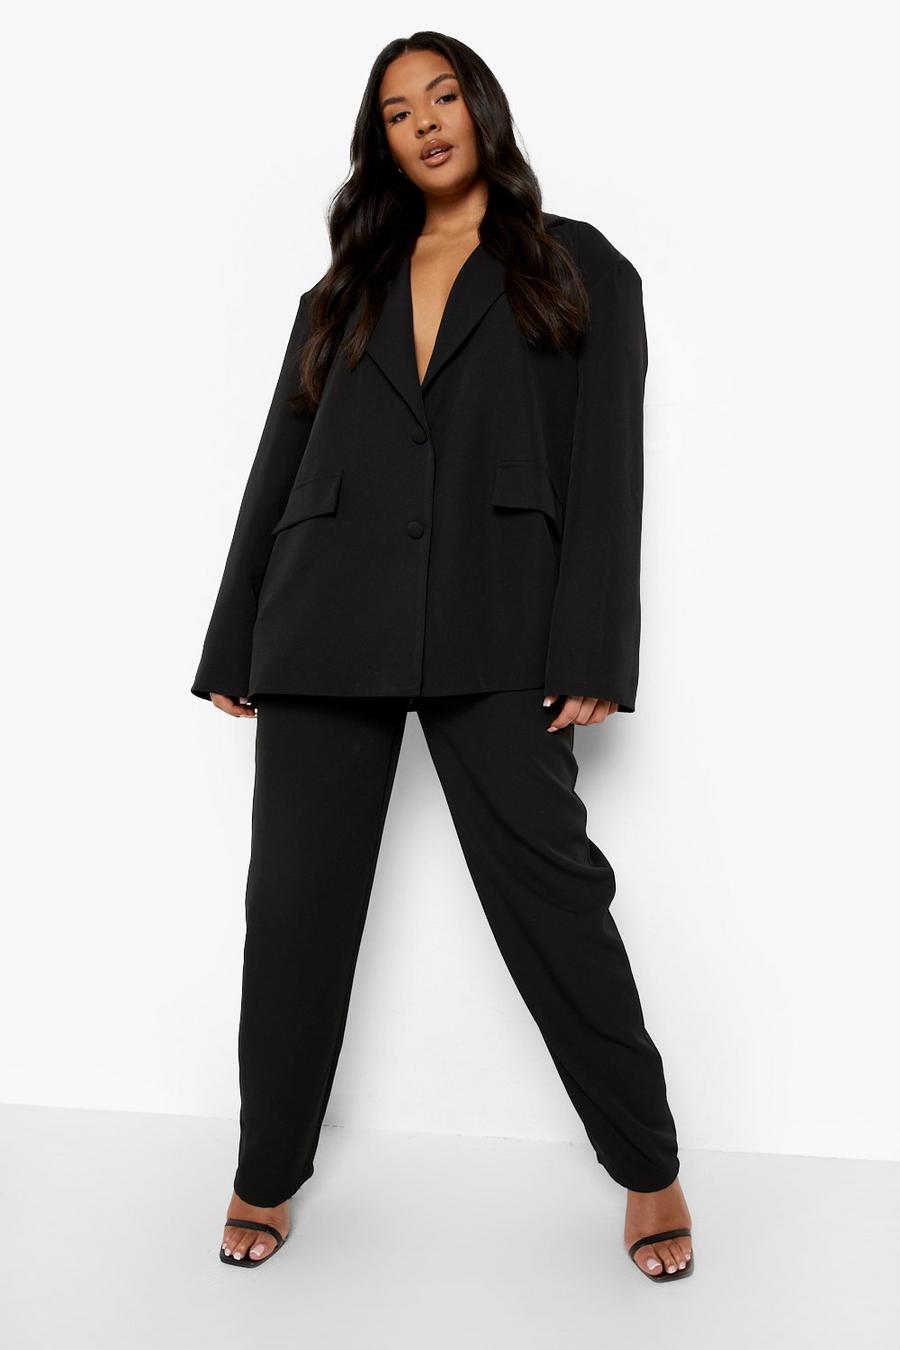 Black negro Plus Super Skinny Double Breasted Blazer & Trousers Suits